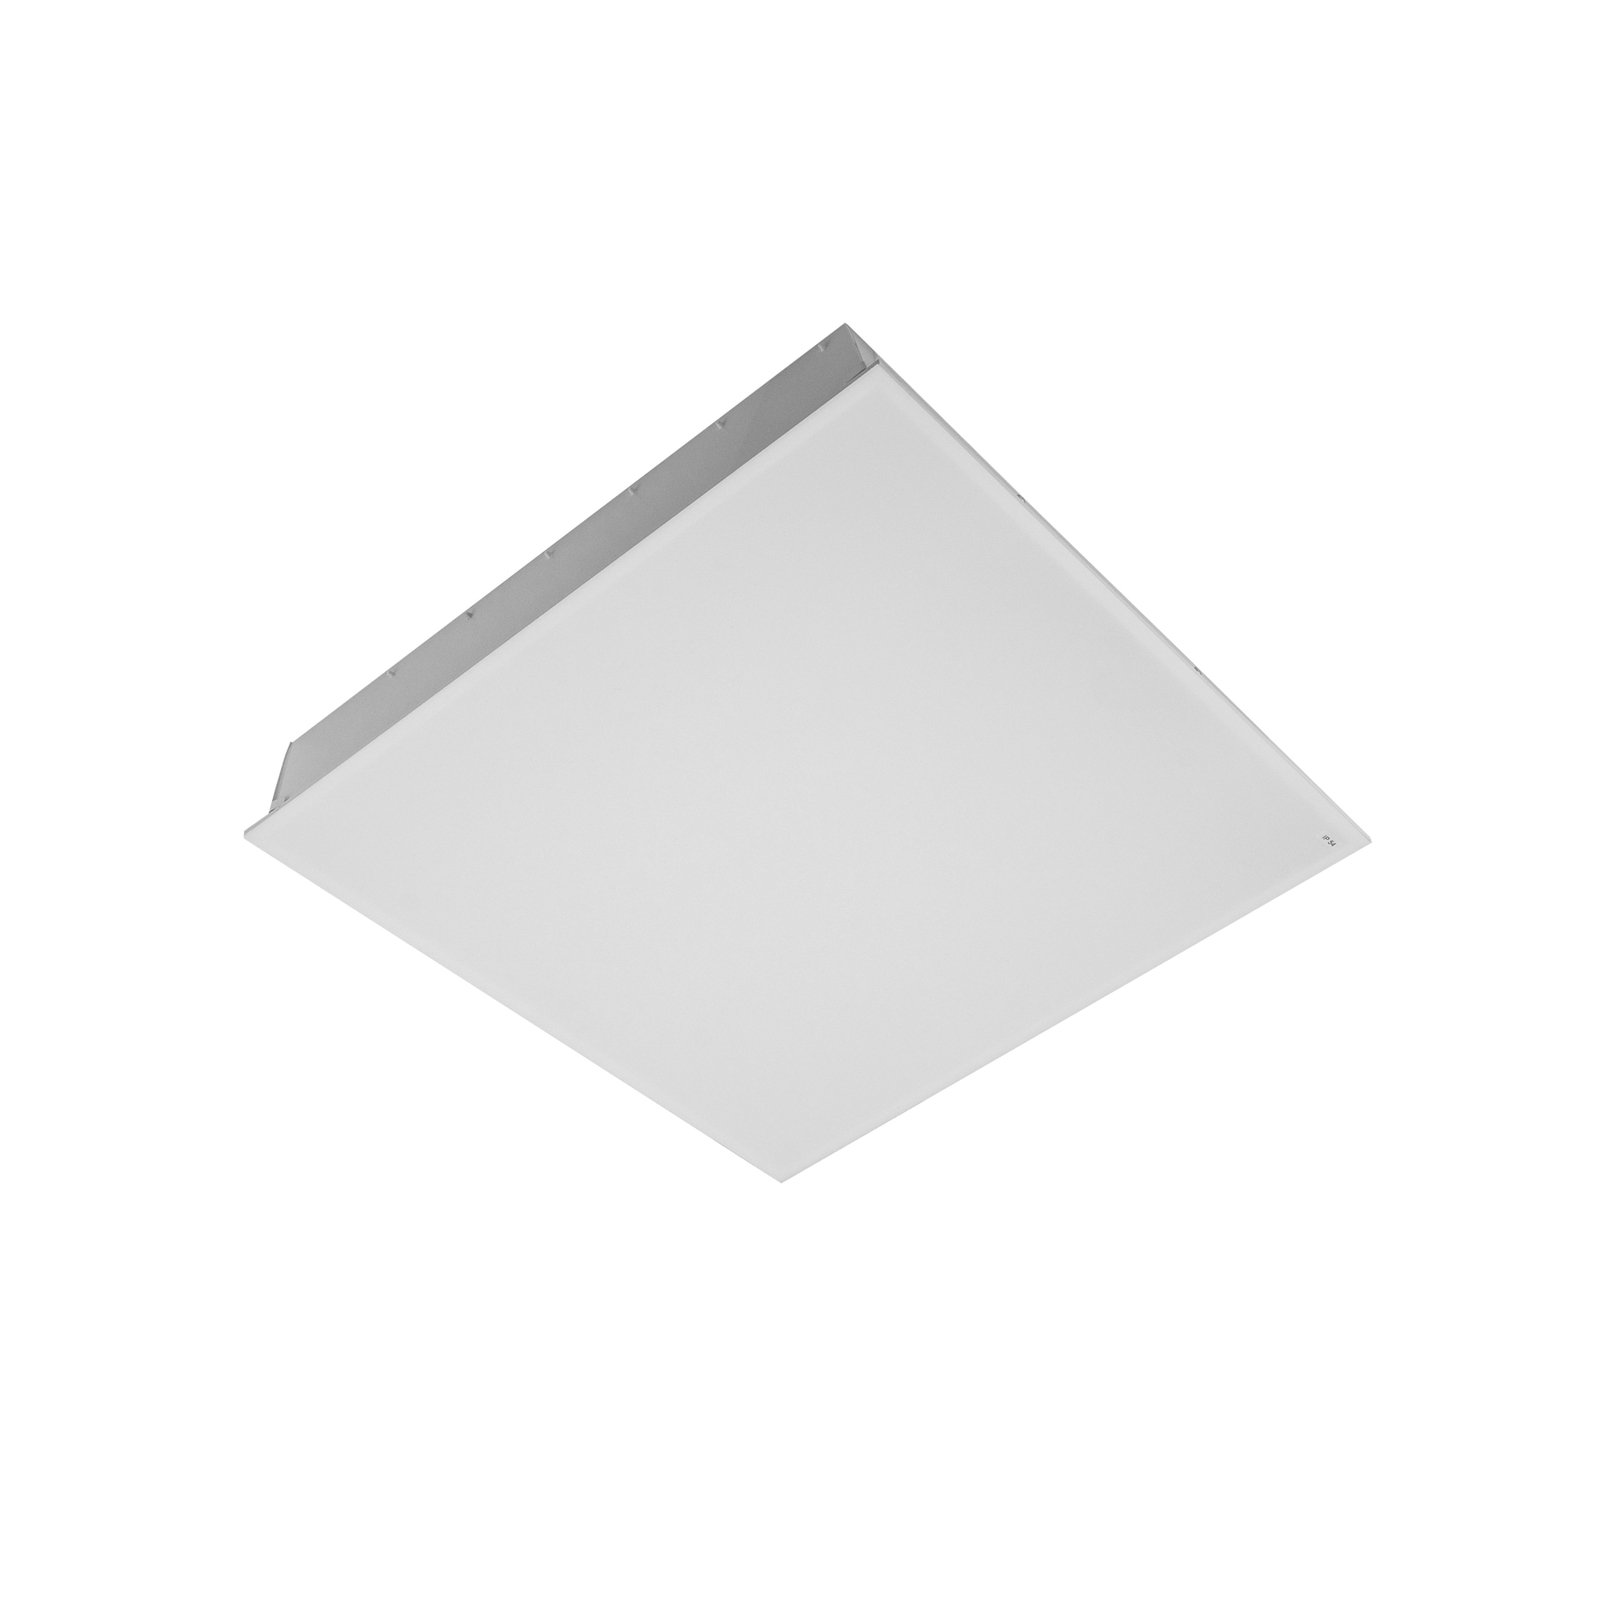 IBP4000 recessed LED panel 625 OP on/off 32W 857